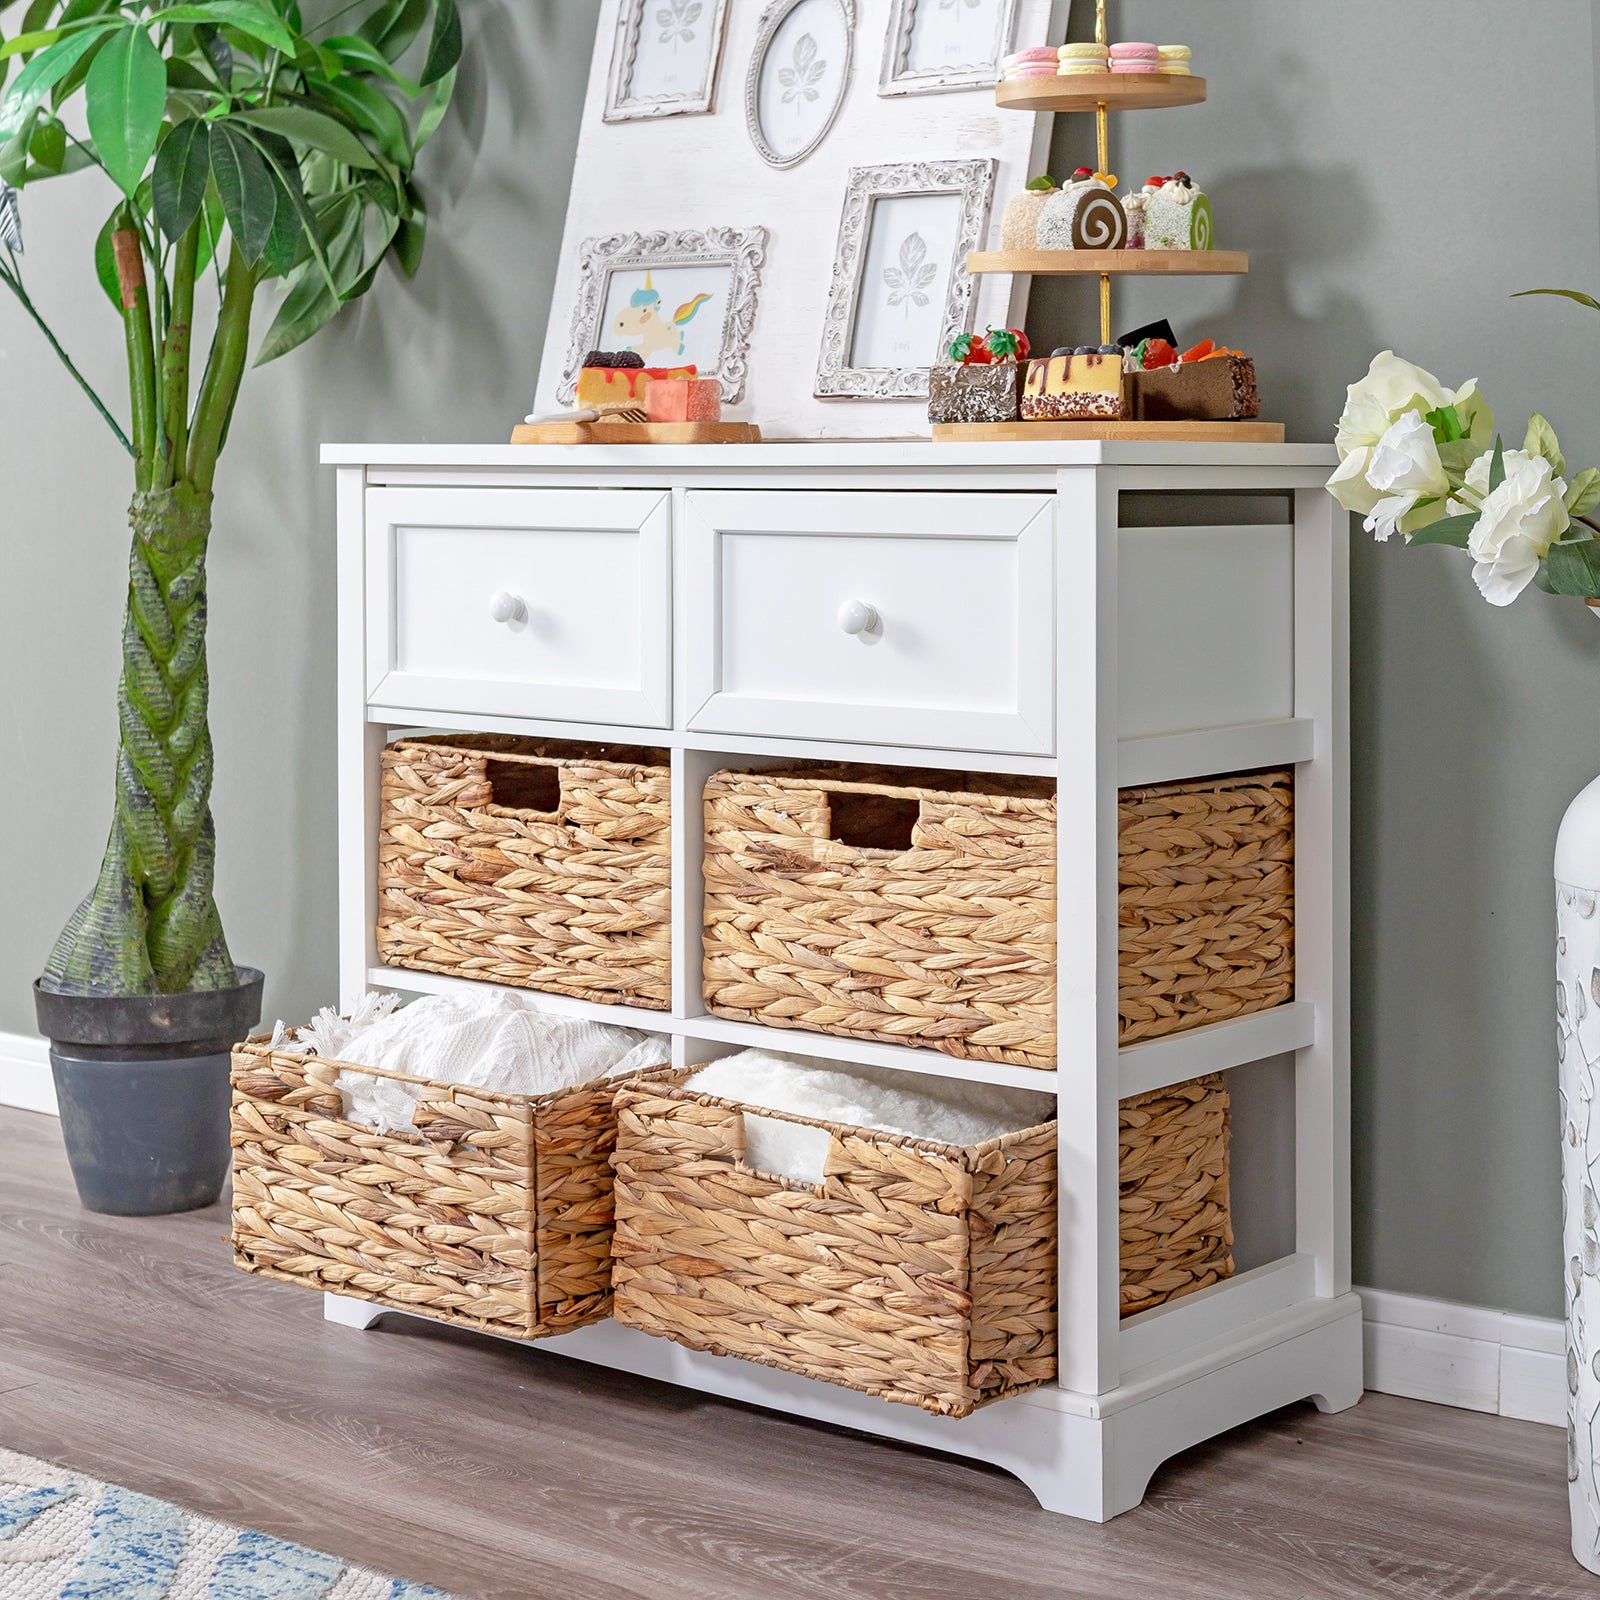 Decorative Storage Cabinet with Removable Woven Baskets -MFSTUDIO